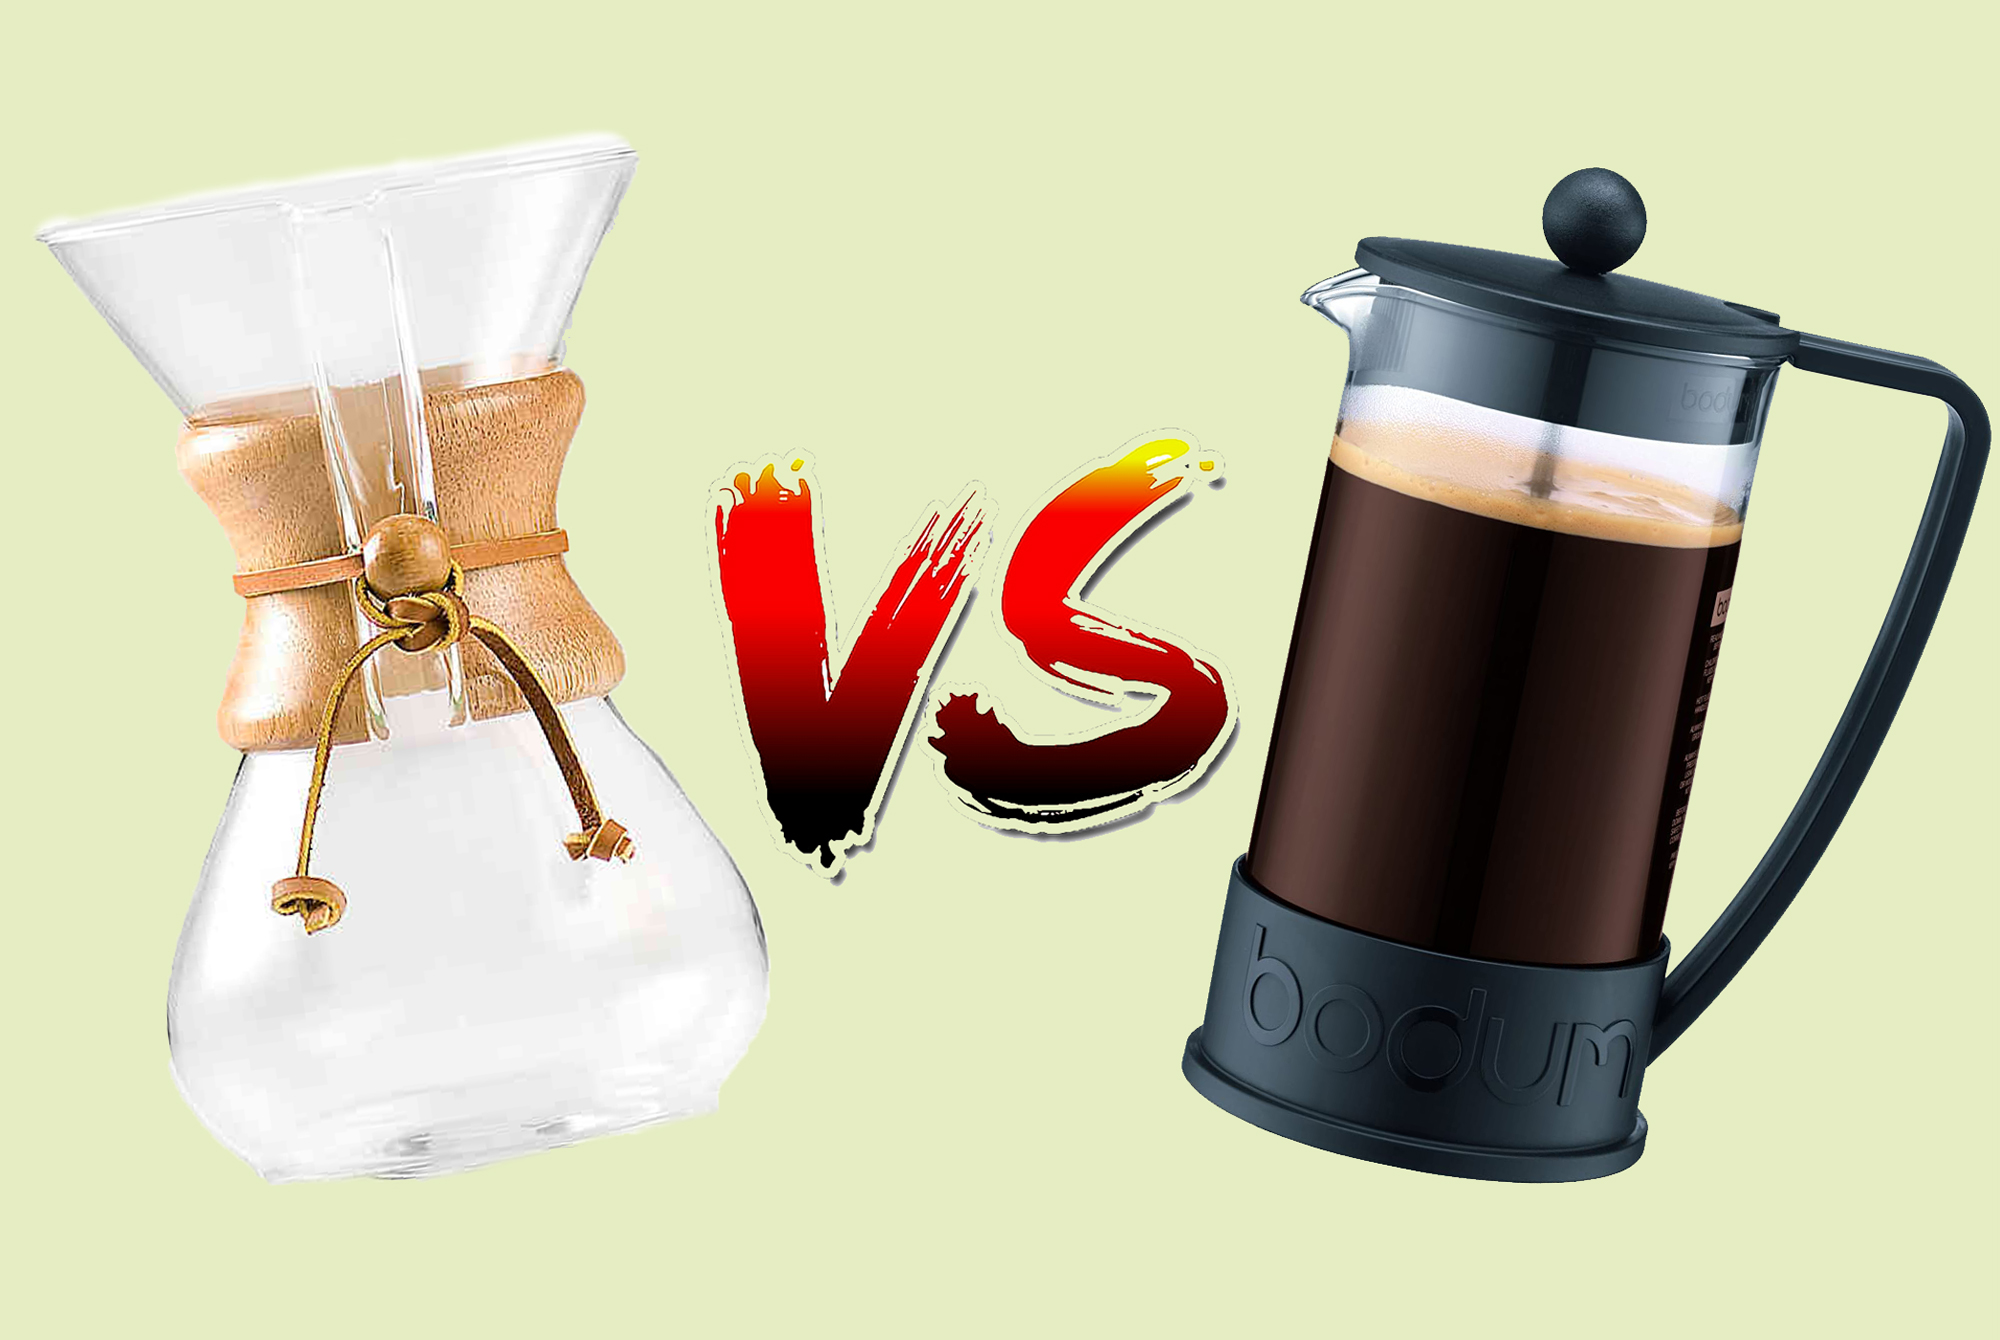 Chemex vs French Press: Which Is Better?